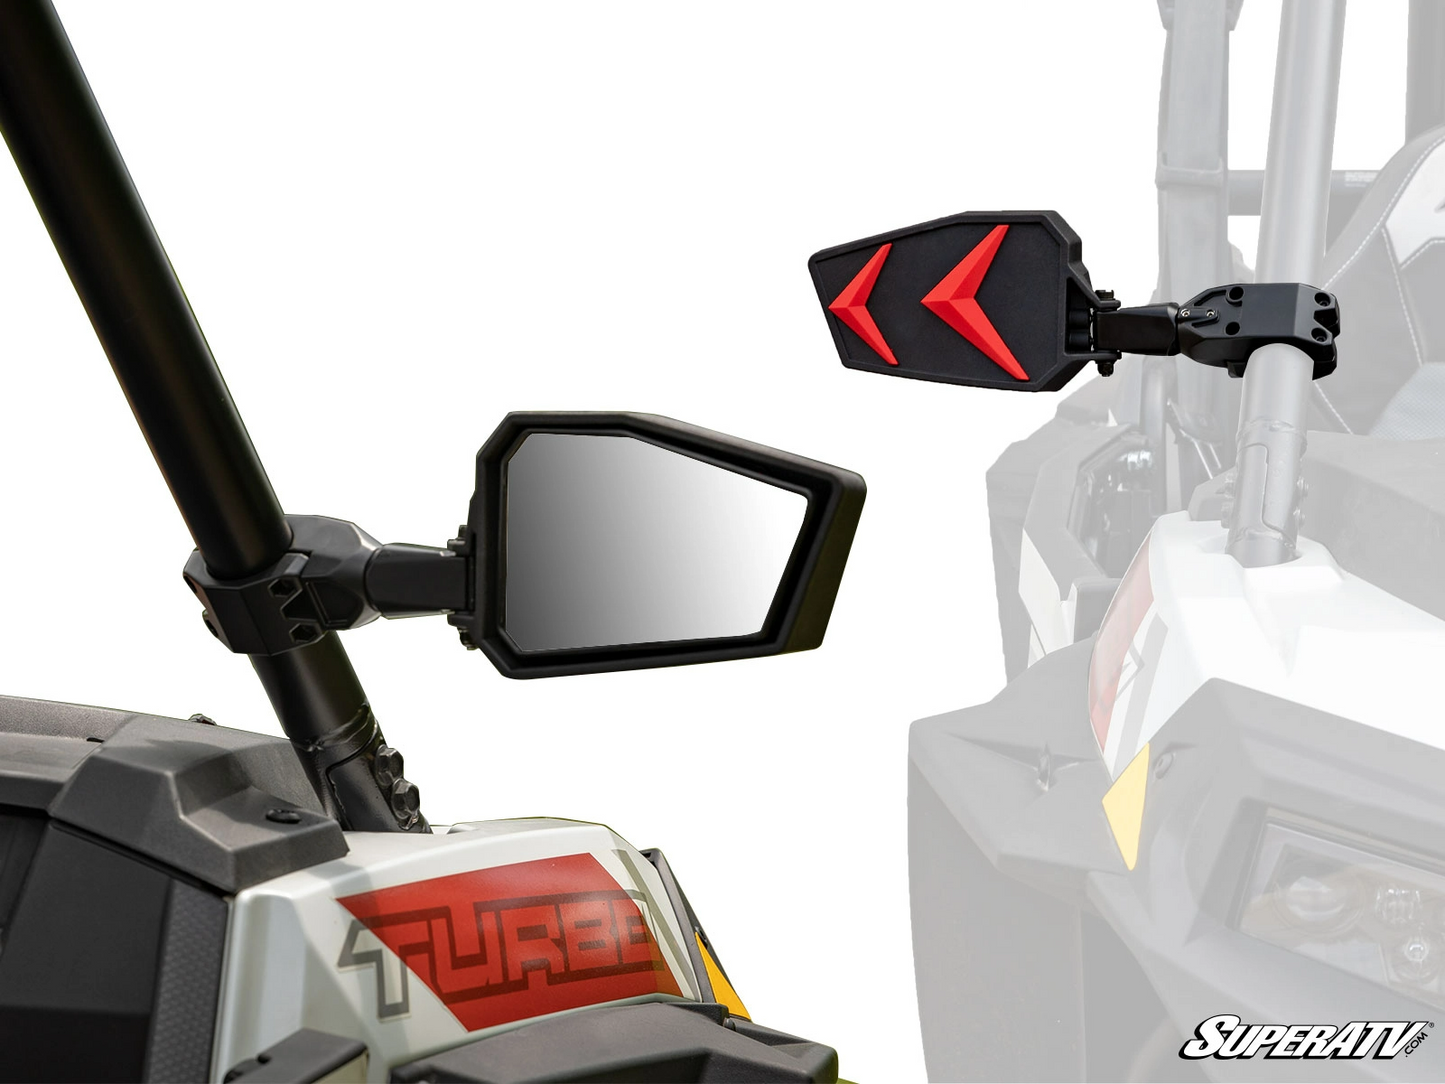 Can-Am Seeker Side View Mirrors